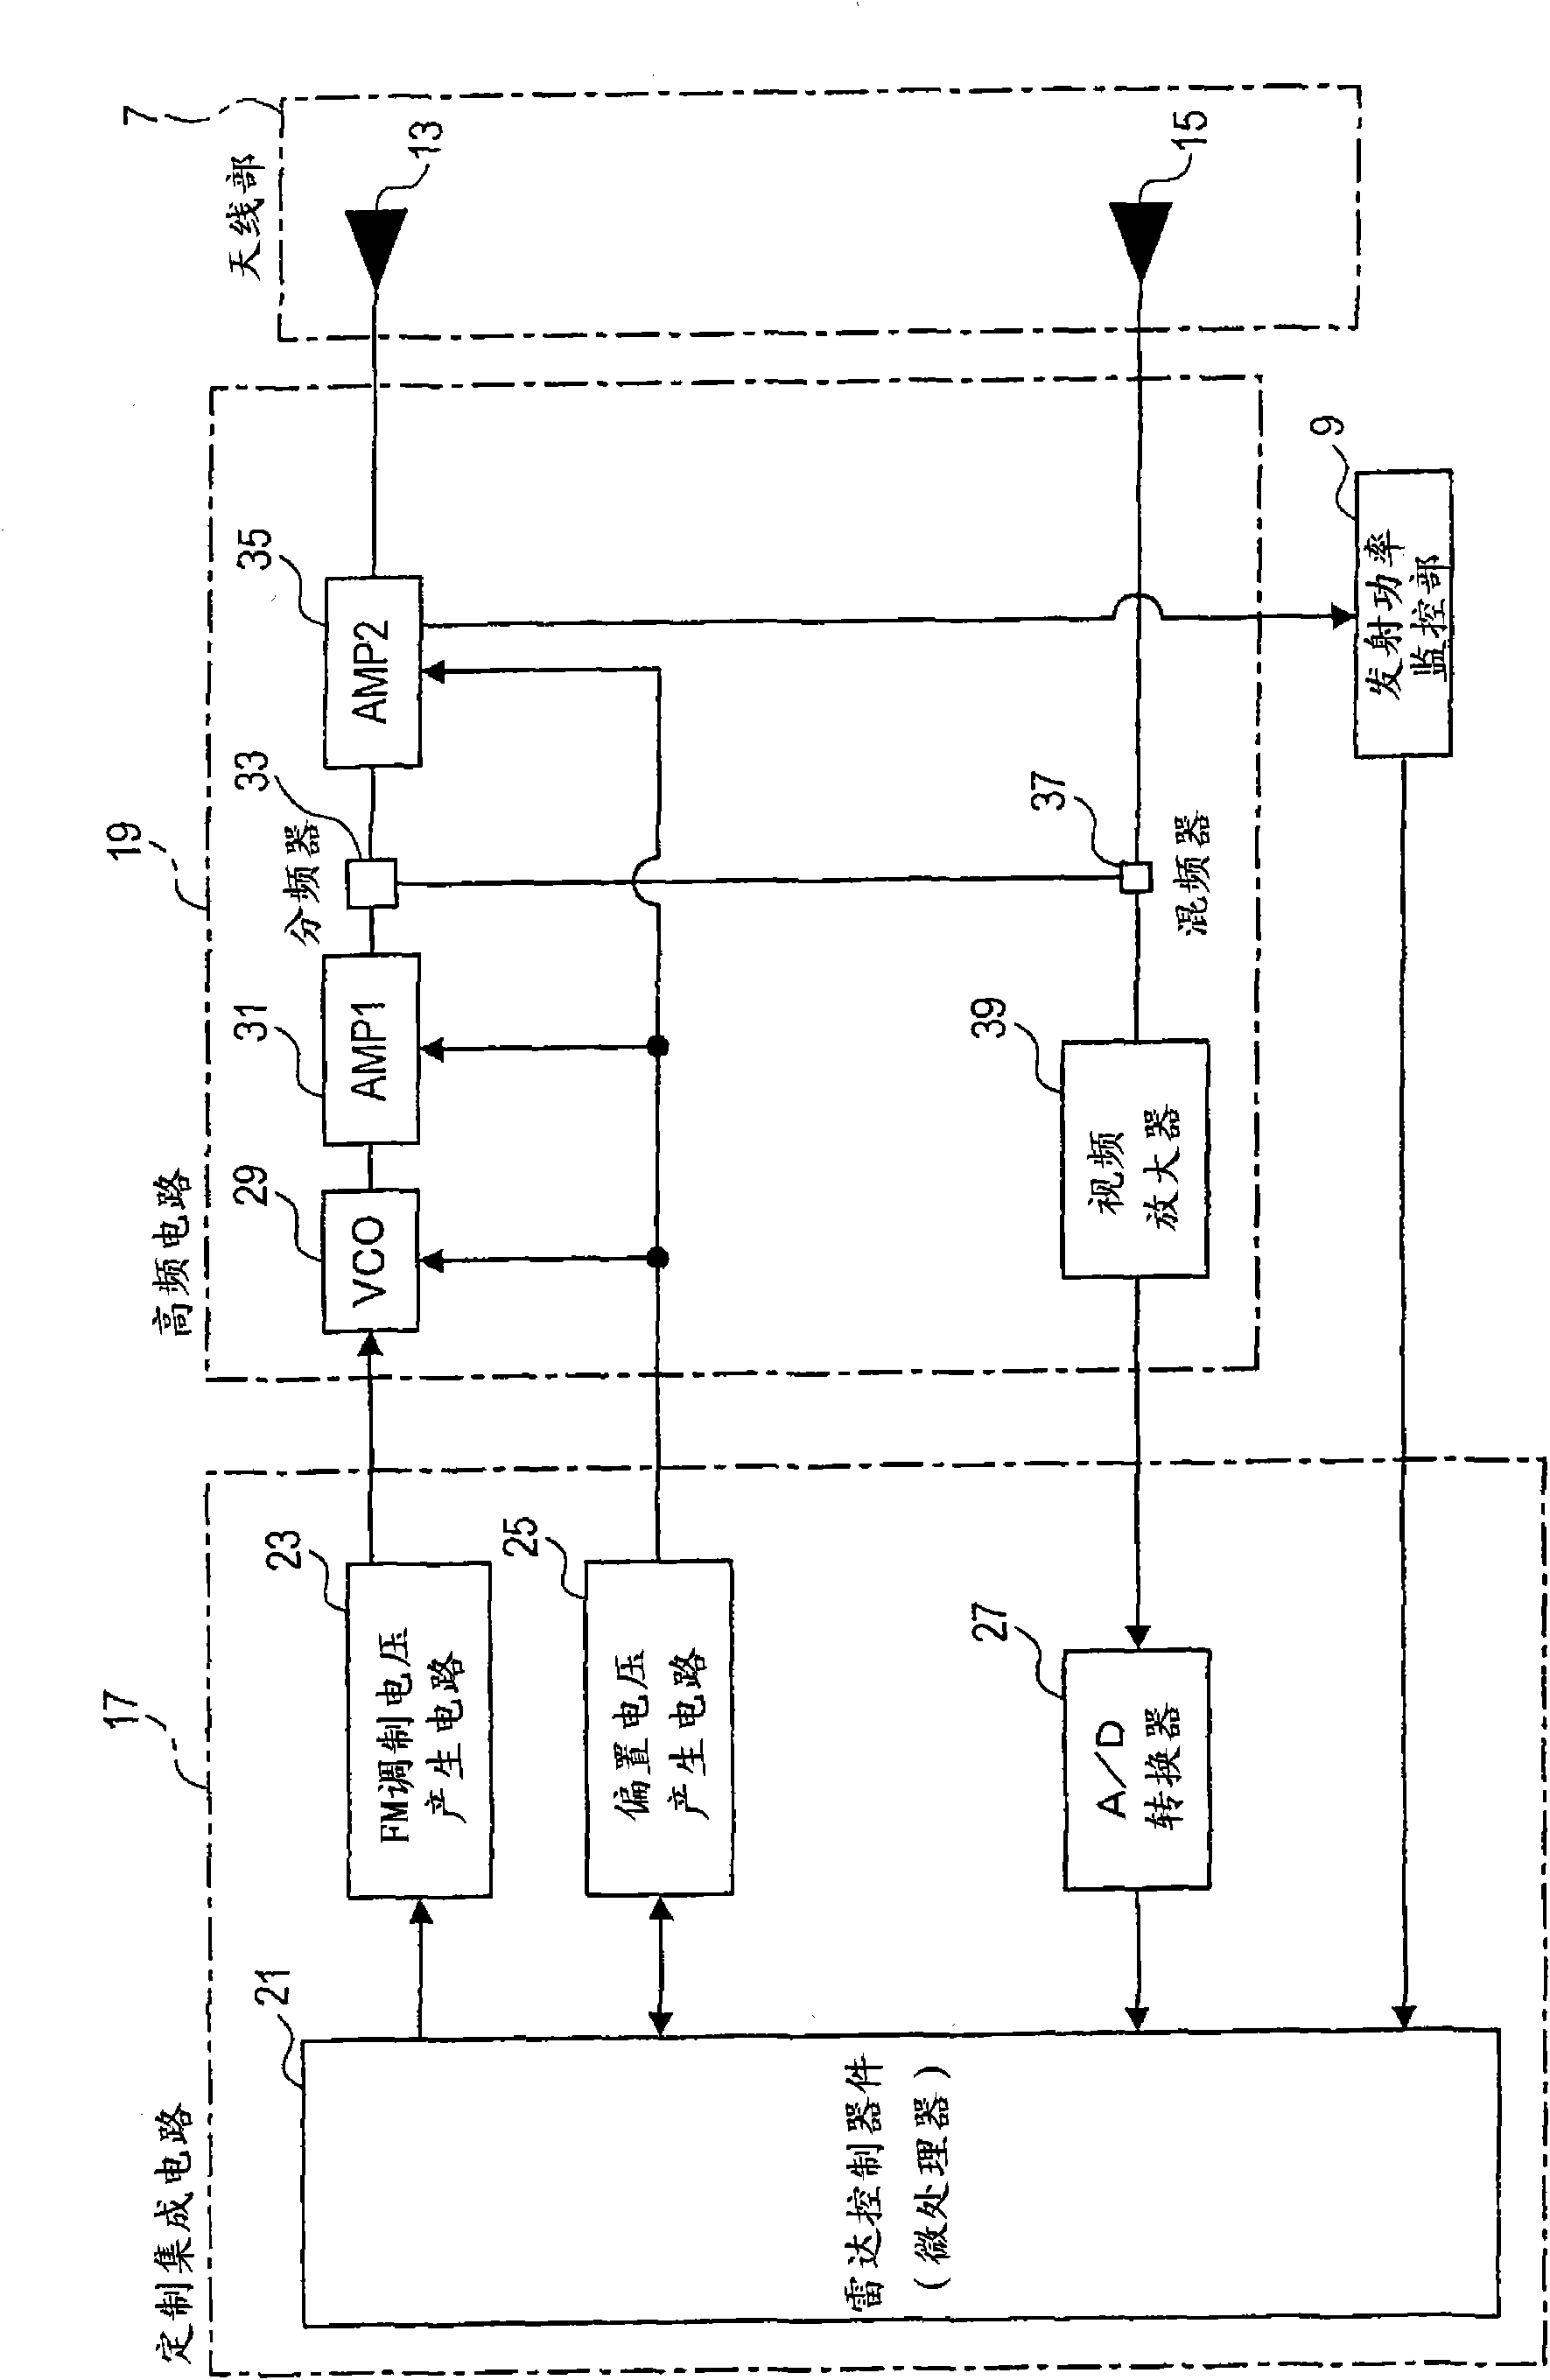 Vehicle radar apparatus having variable output power controlled based on speed of vehicle